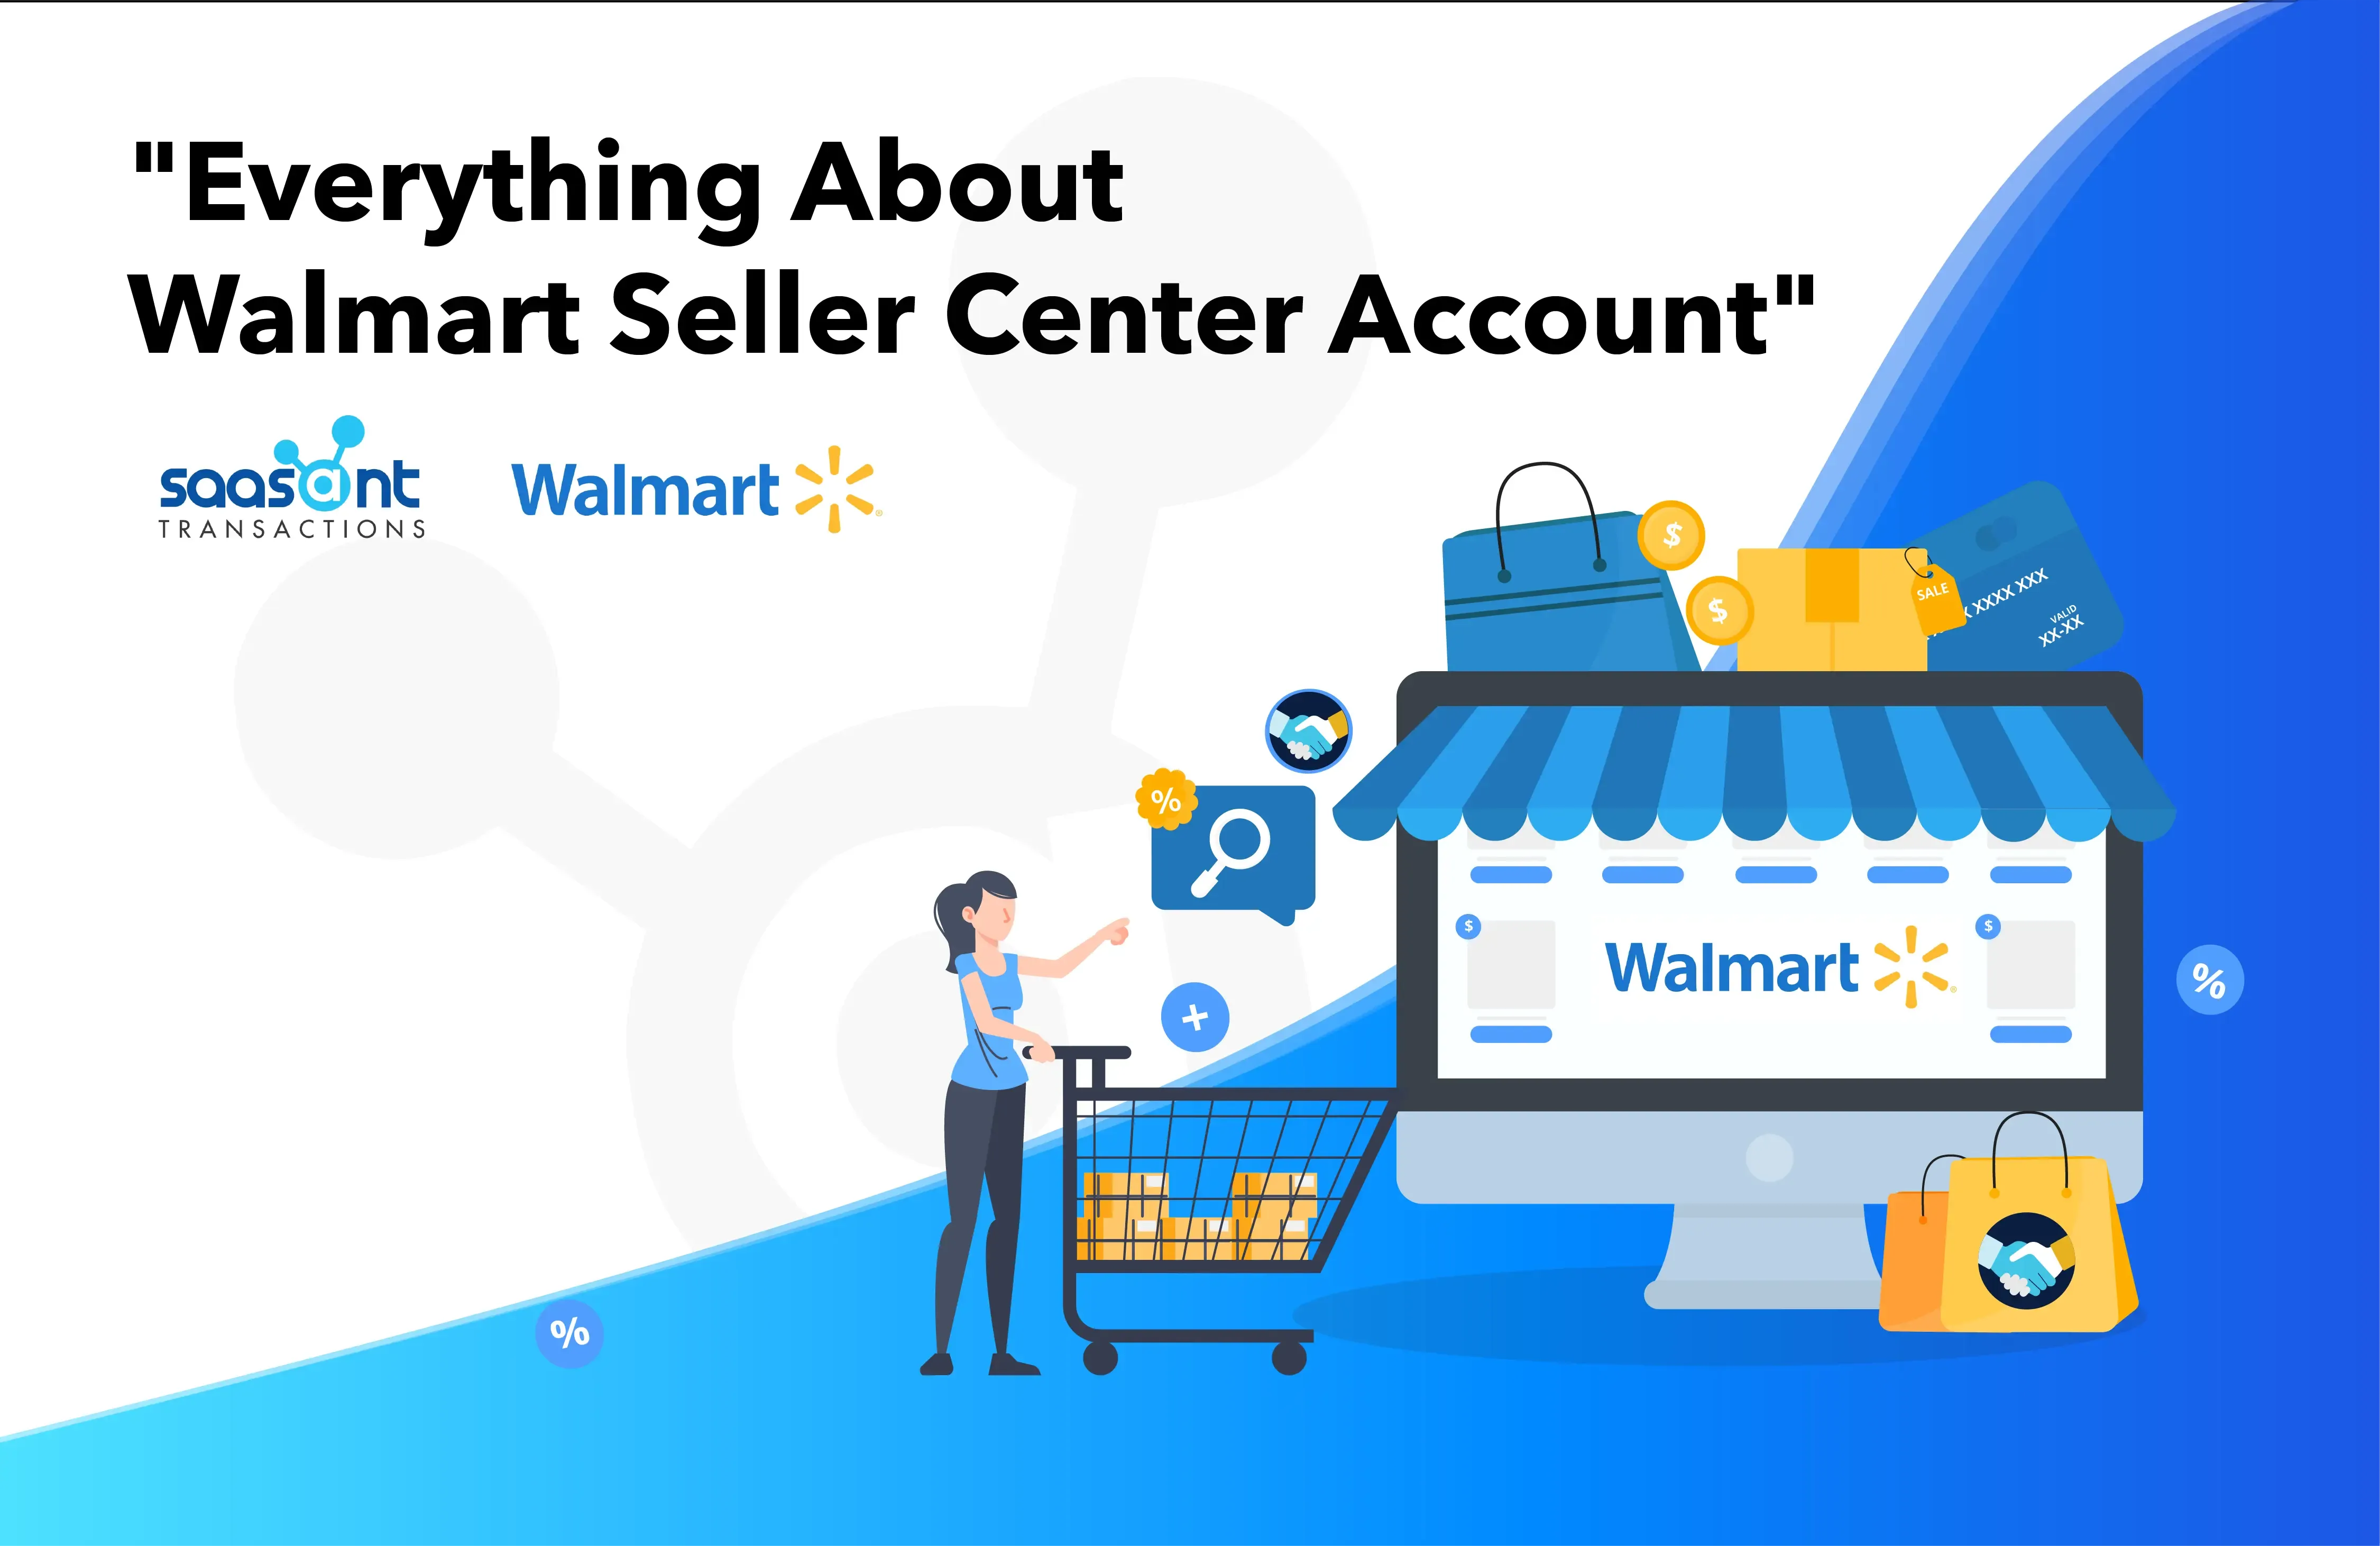 Walmart Marketplace Seller FAQs to Get You Started